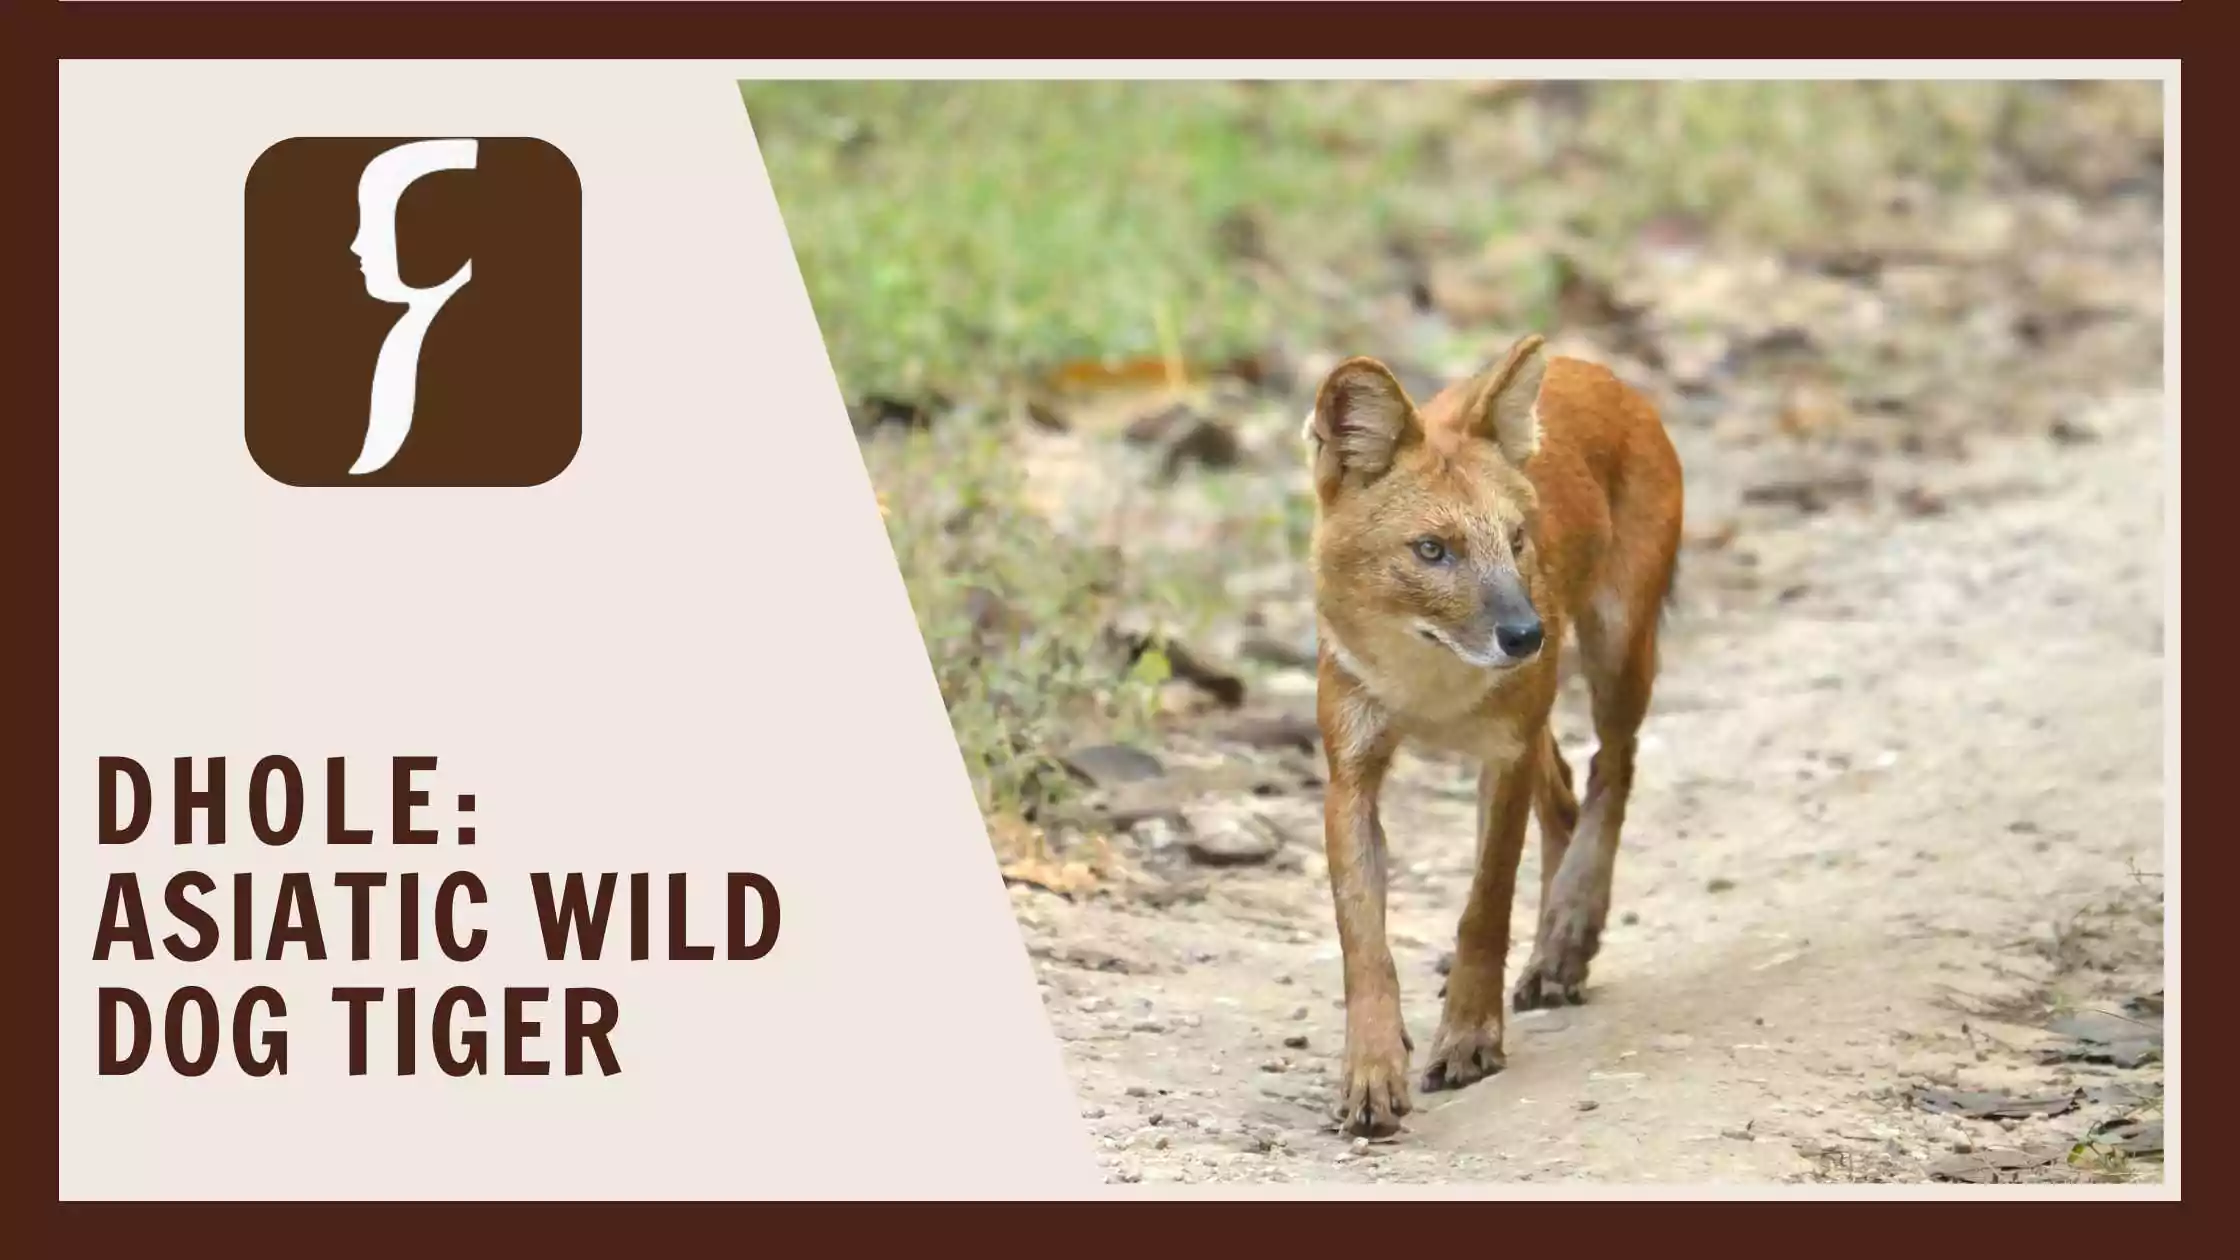 Dhole - Asiatic wild dog tiger